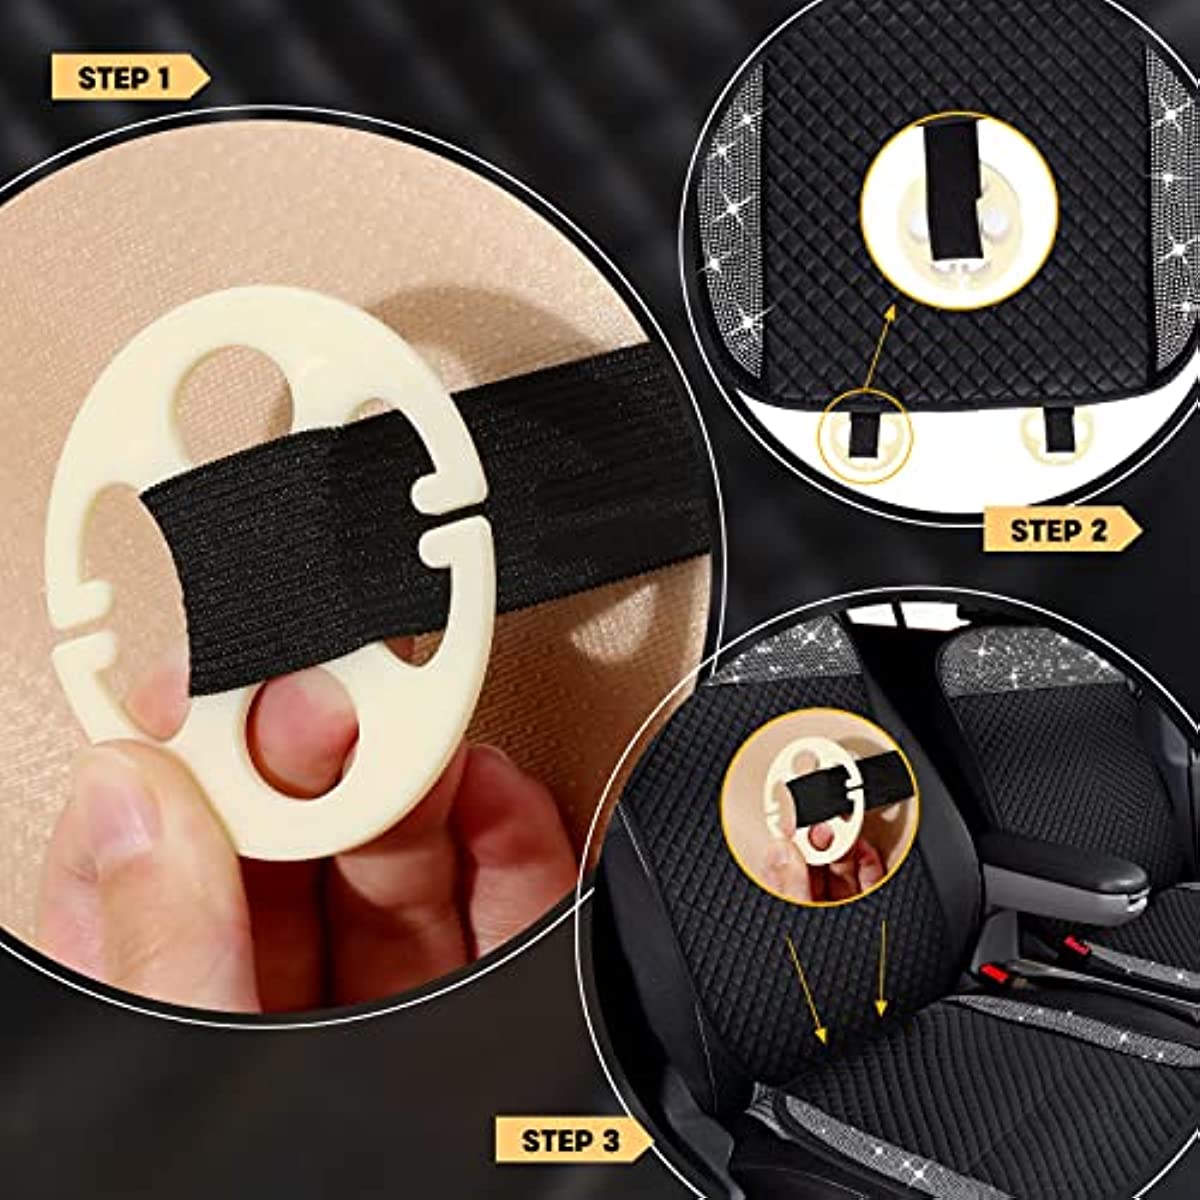 24 Pieces Car Seat Cover Plum Plate Metal Hook,12 Pcs Plastic Car Seat  Covers Chucks,12 Pcs Metal Hooks Locking Clip Plastic Card Fixed Fastener